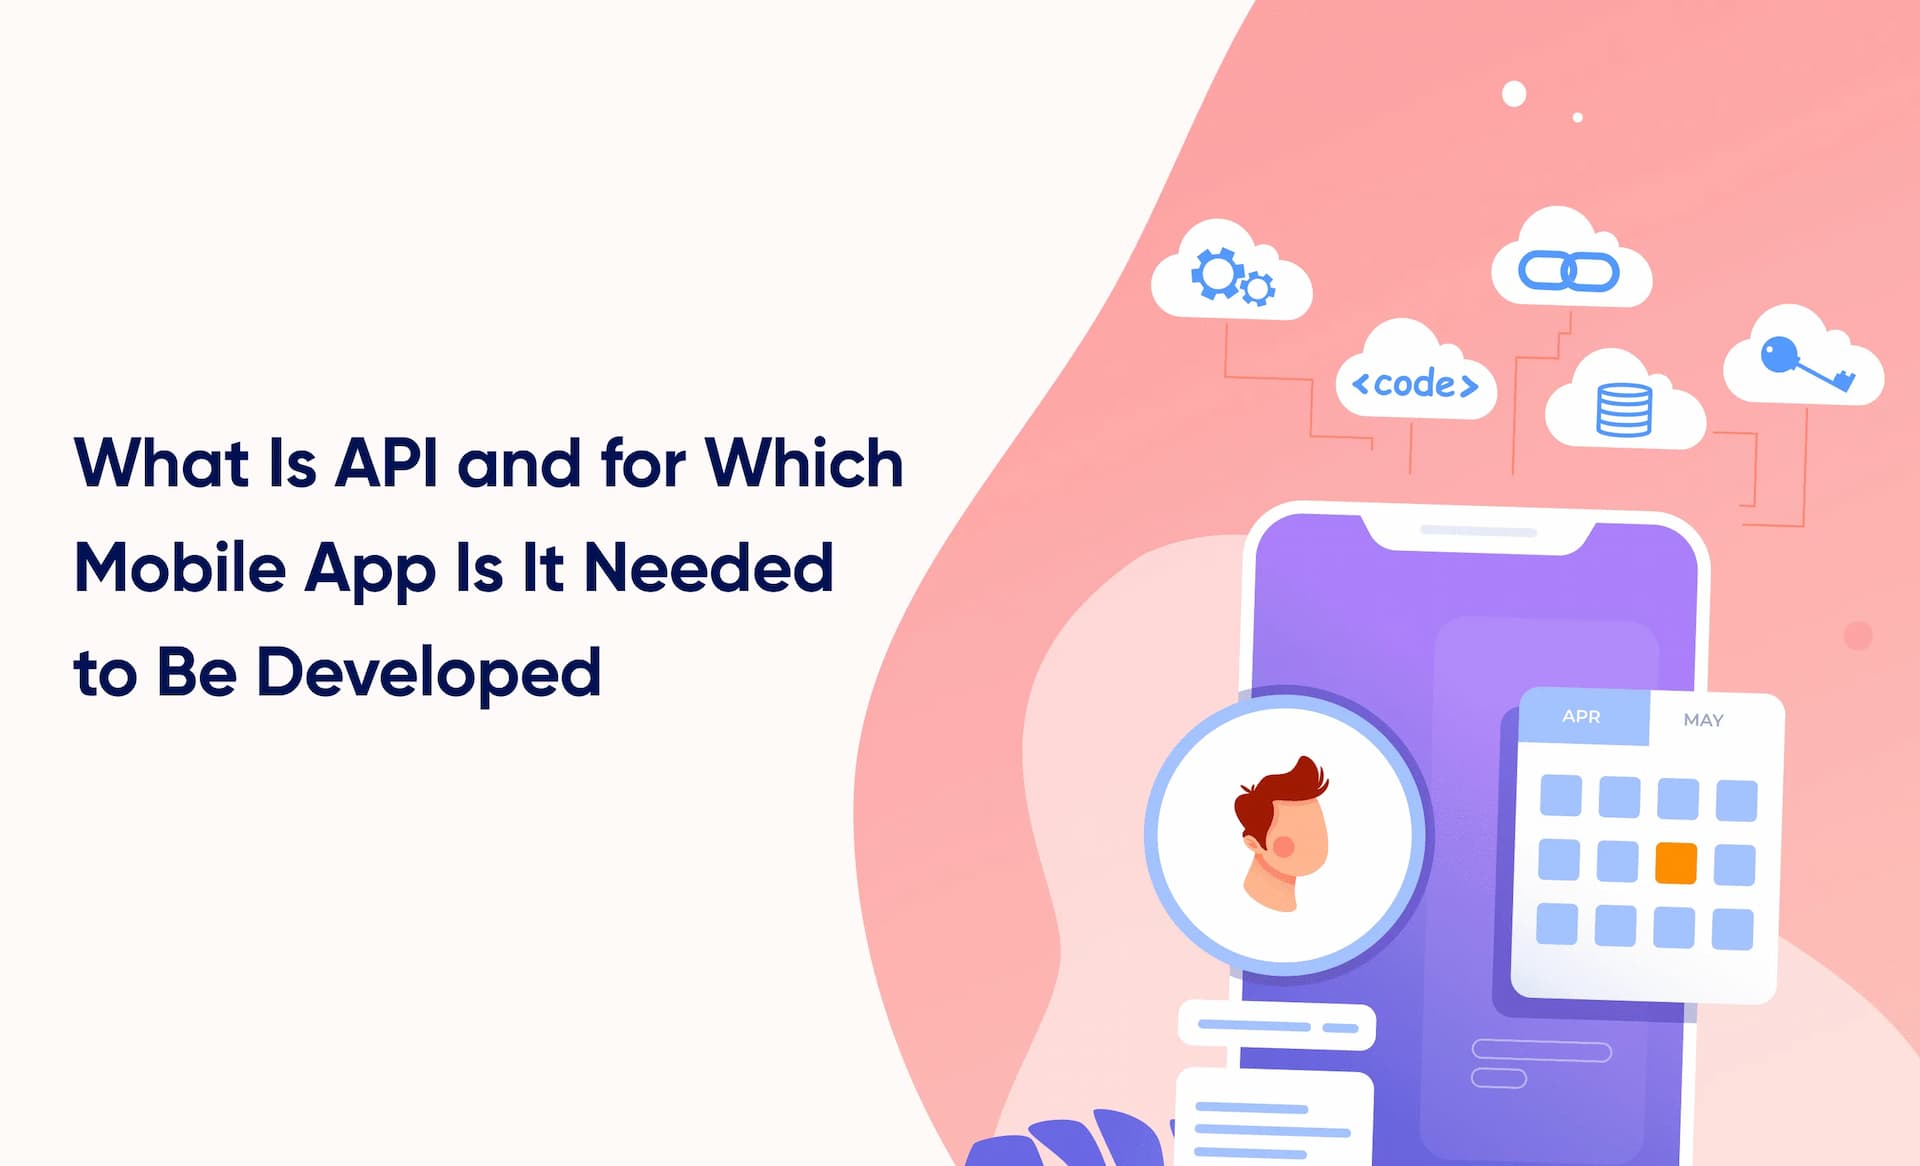 What Is API and for Which Mobile App Is It Needed to Be Developed